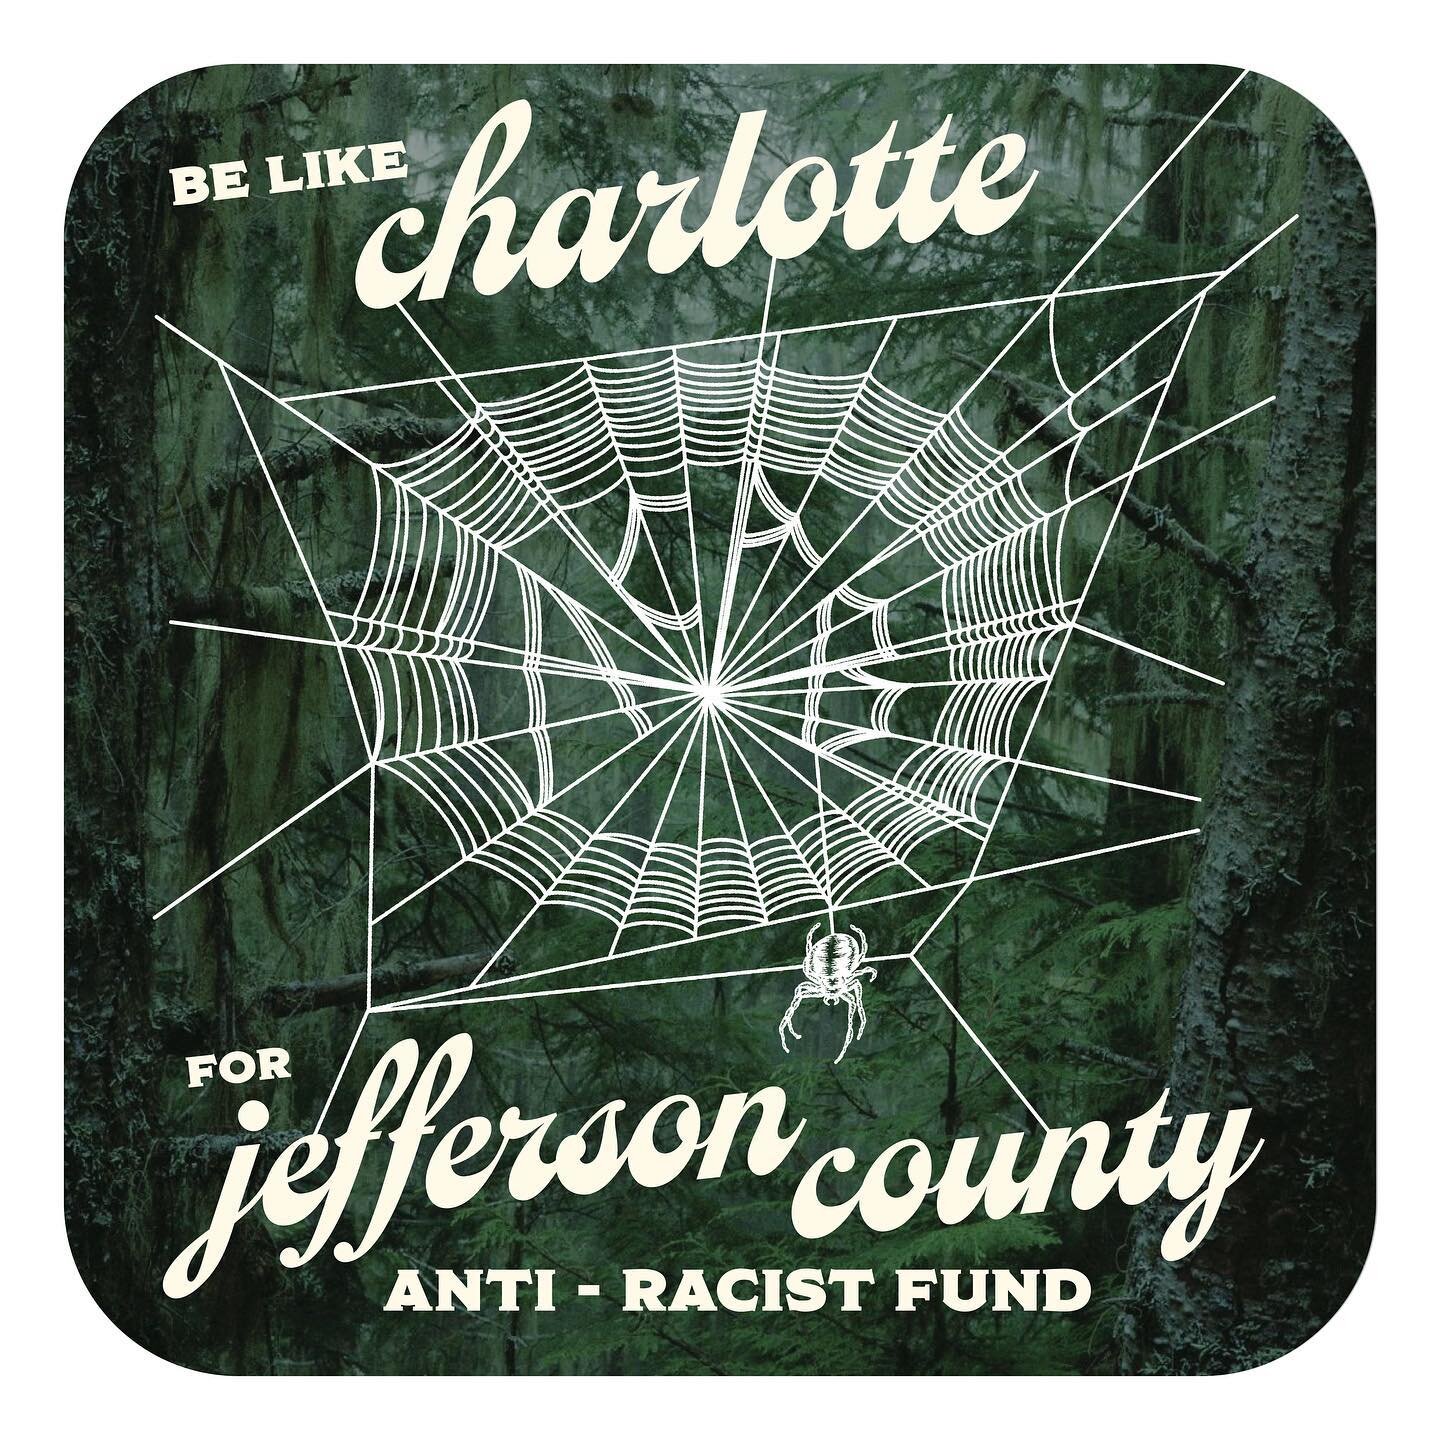 🌟🌟🌟 NEW COMMUNITY MUTUAL AID SPOTLIGHT! 🌟🌟🌟  All profits from the sale of &ldquo;Be Like Charlotte&rdquo; / &ldquo;ACAB&rdquo; merch sales in my shop for the next few months will go towards supporting Jefferson County Anti-Racist Fund!!! (Shop 